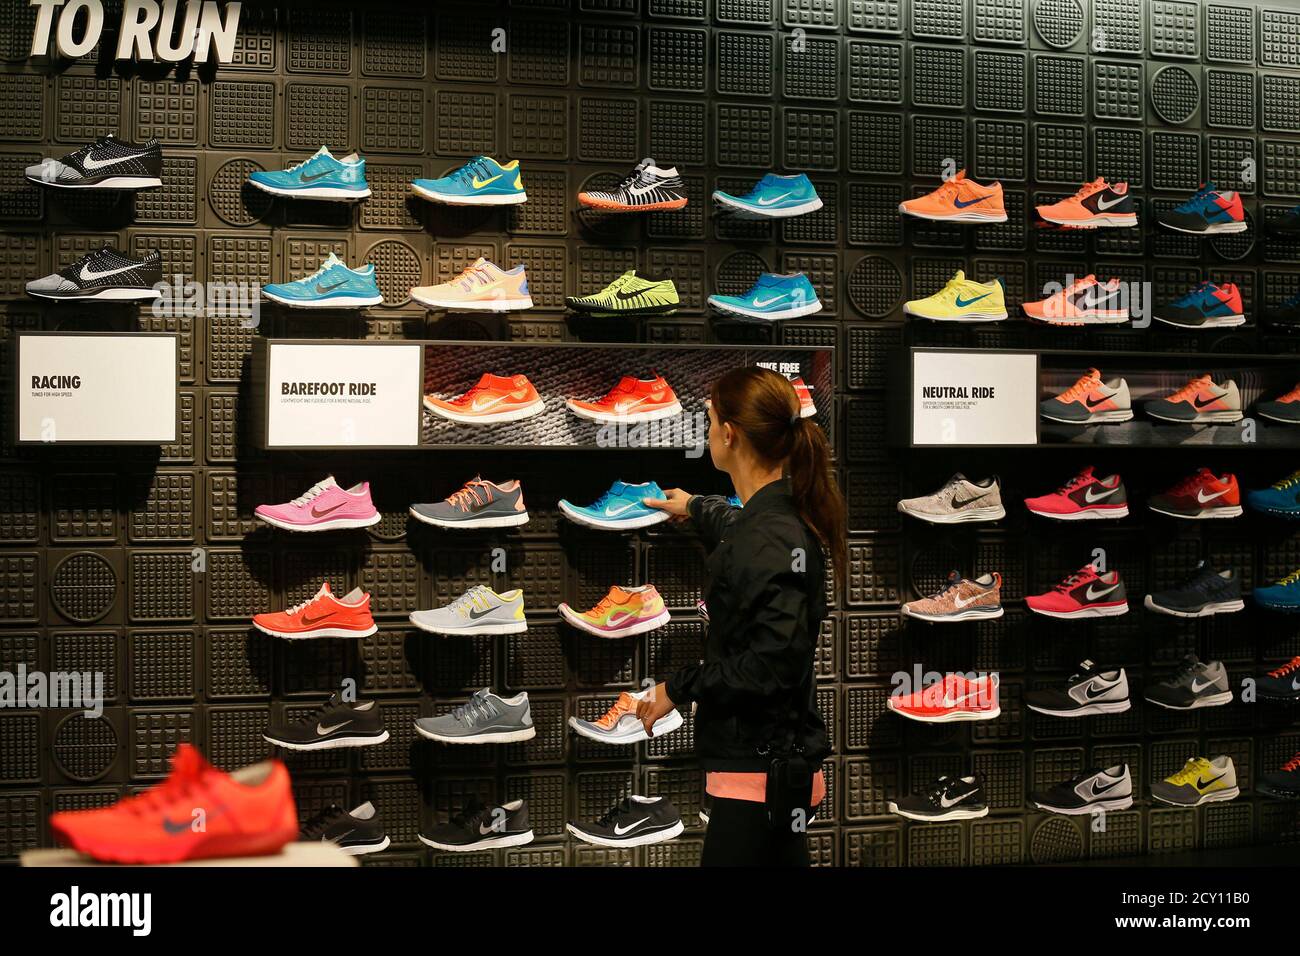 A woman picks up a shoe in the Nike store in Santa Monica, California,  September 25, 2013. NIKE, Inc. plans to release its first quarter fiscal  2014 financial results on Thursday, September